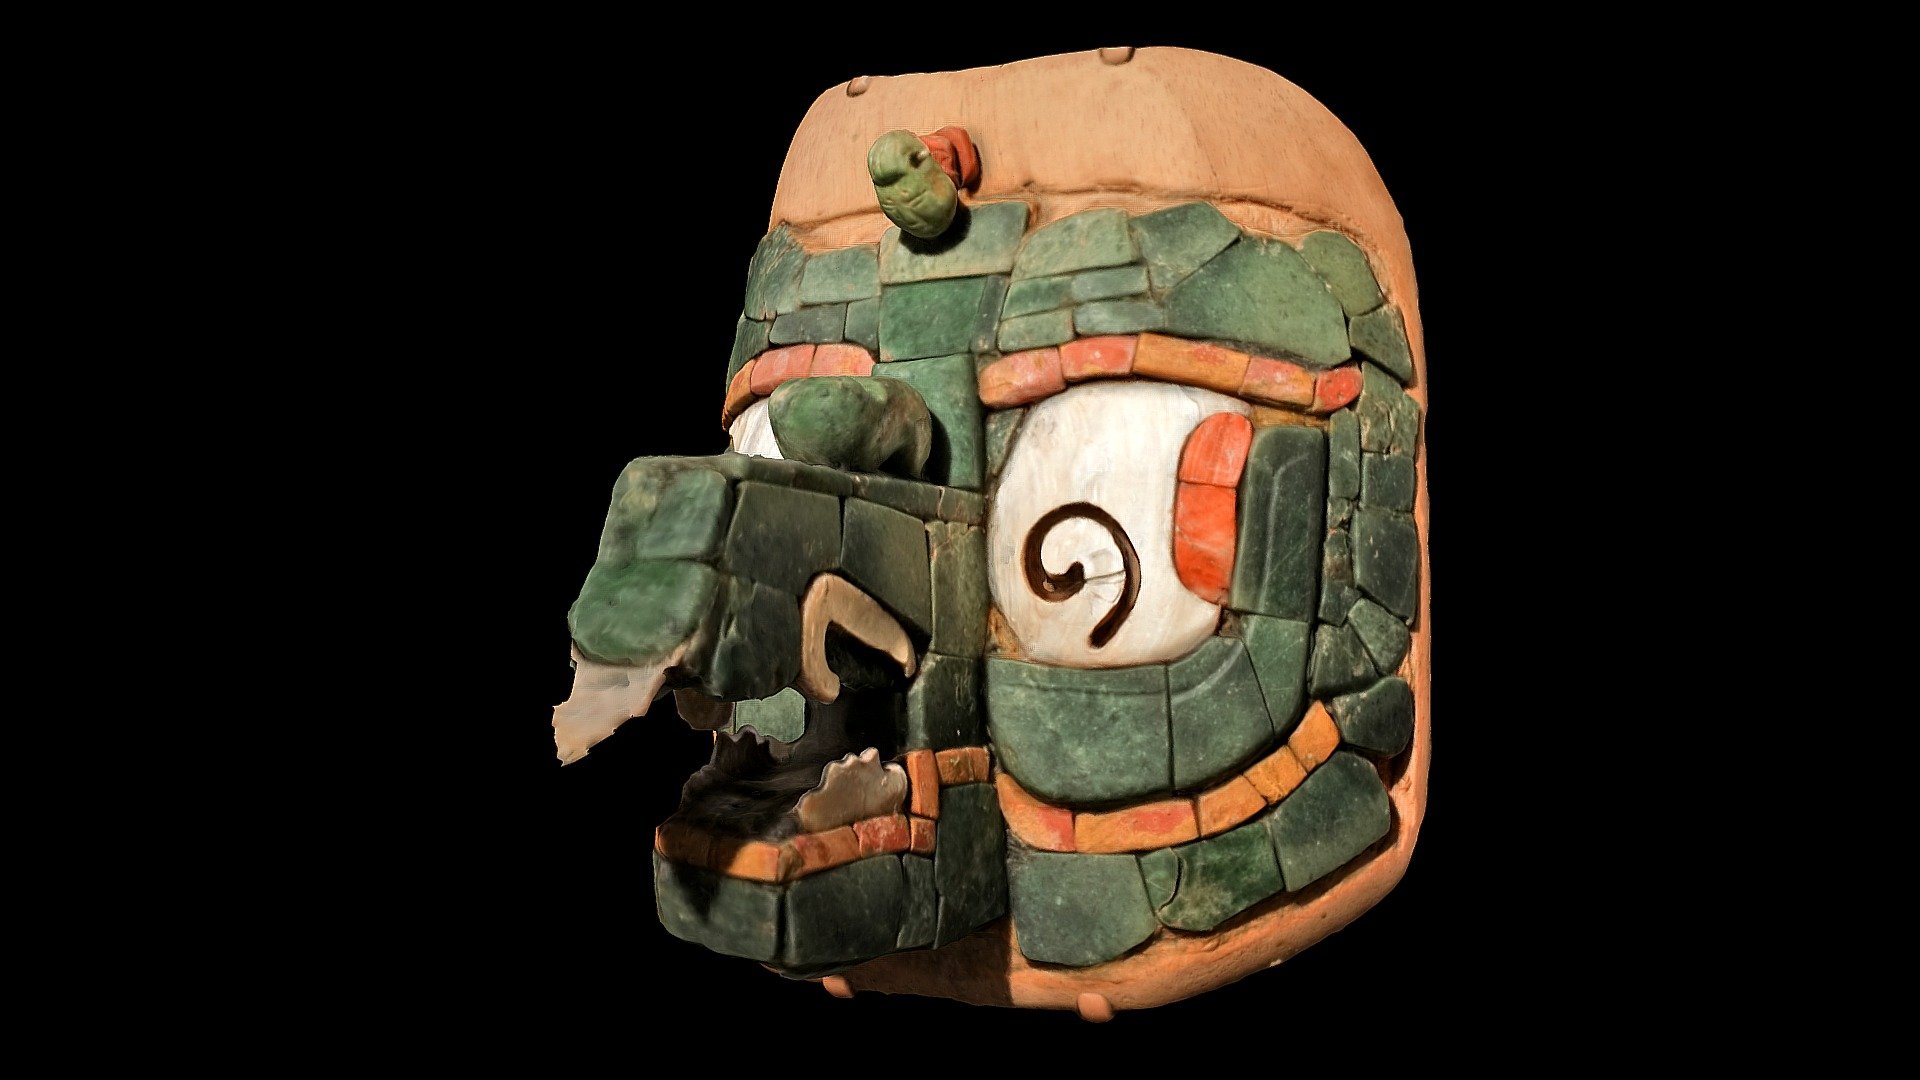 Maya, Temple XIII, Palenque, Mexico, 672 C.E. Golden Kingdoms: Luxury Arts in the Ancient Americas, The Metropolitan Museum of Art. Catalog number 138. https://www.metmuseum.org/exhibitions/listings/2018/golden-kingdoms - A headdress for a queen - 3D model by Alexandre Tokovinine (@tokovinin3d) 3d model